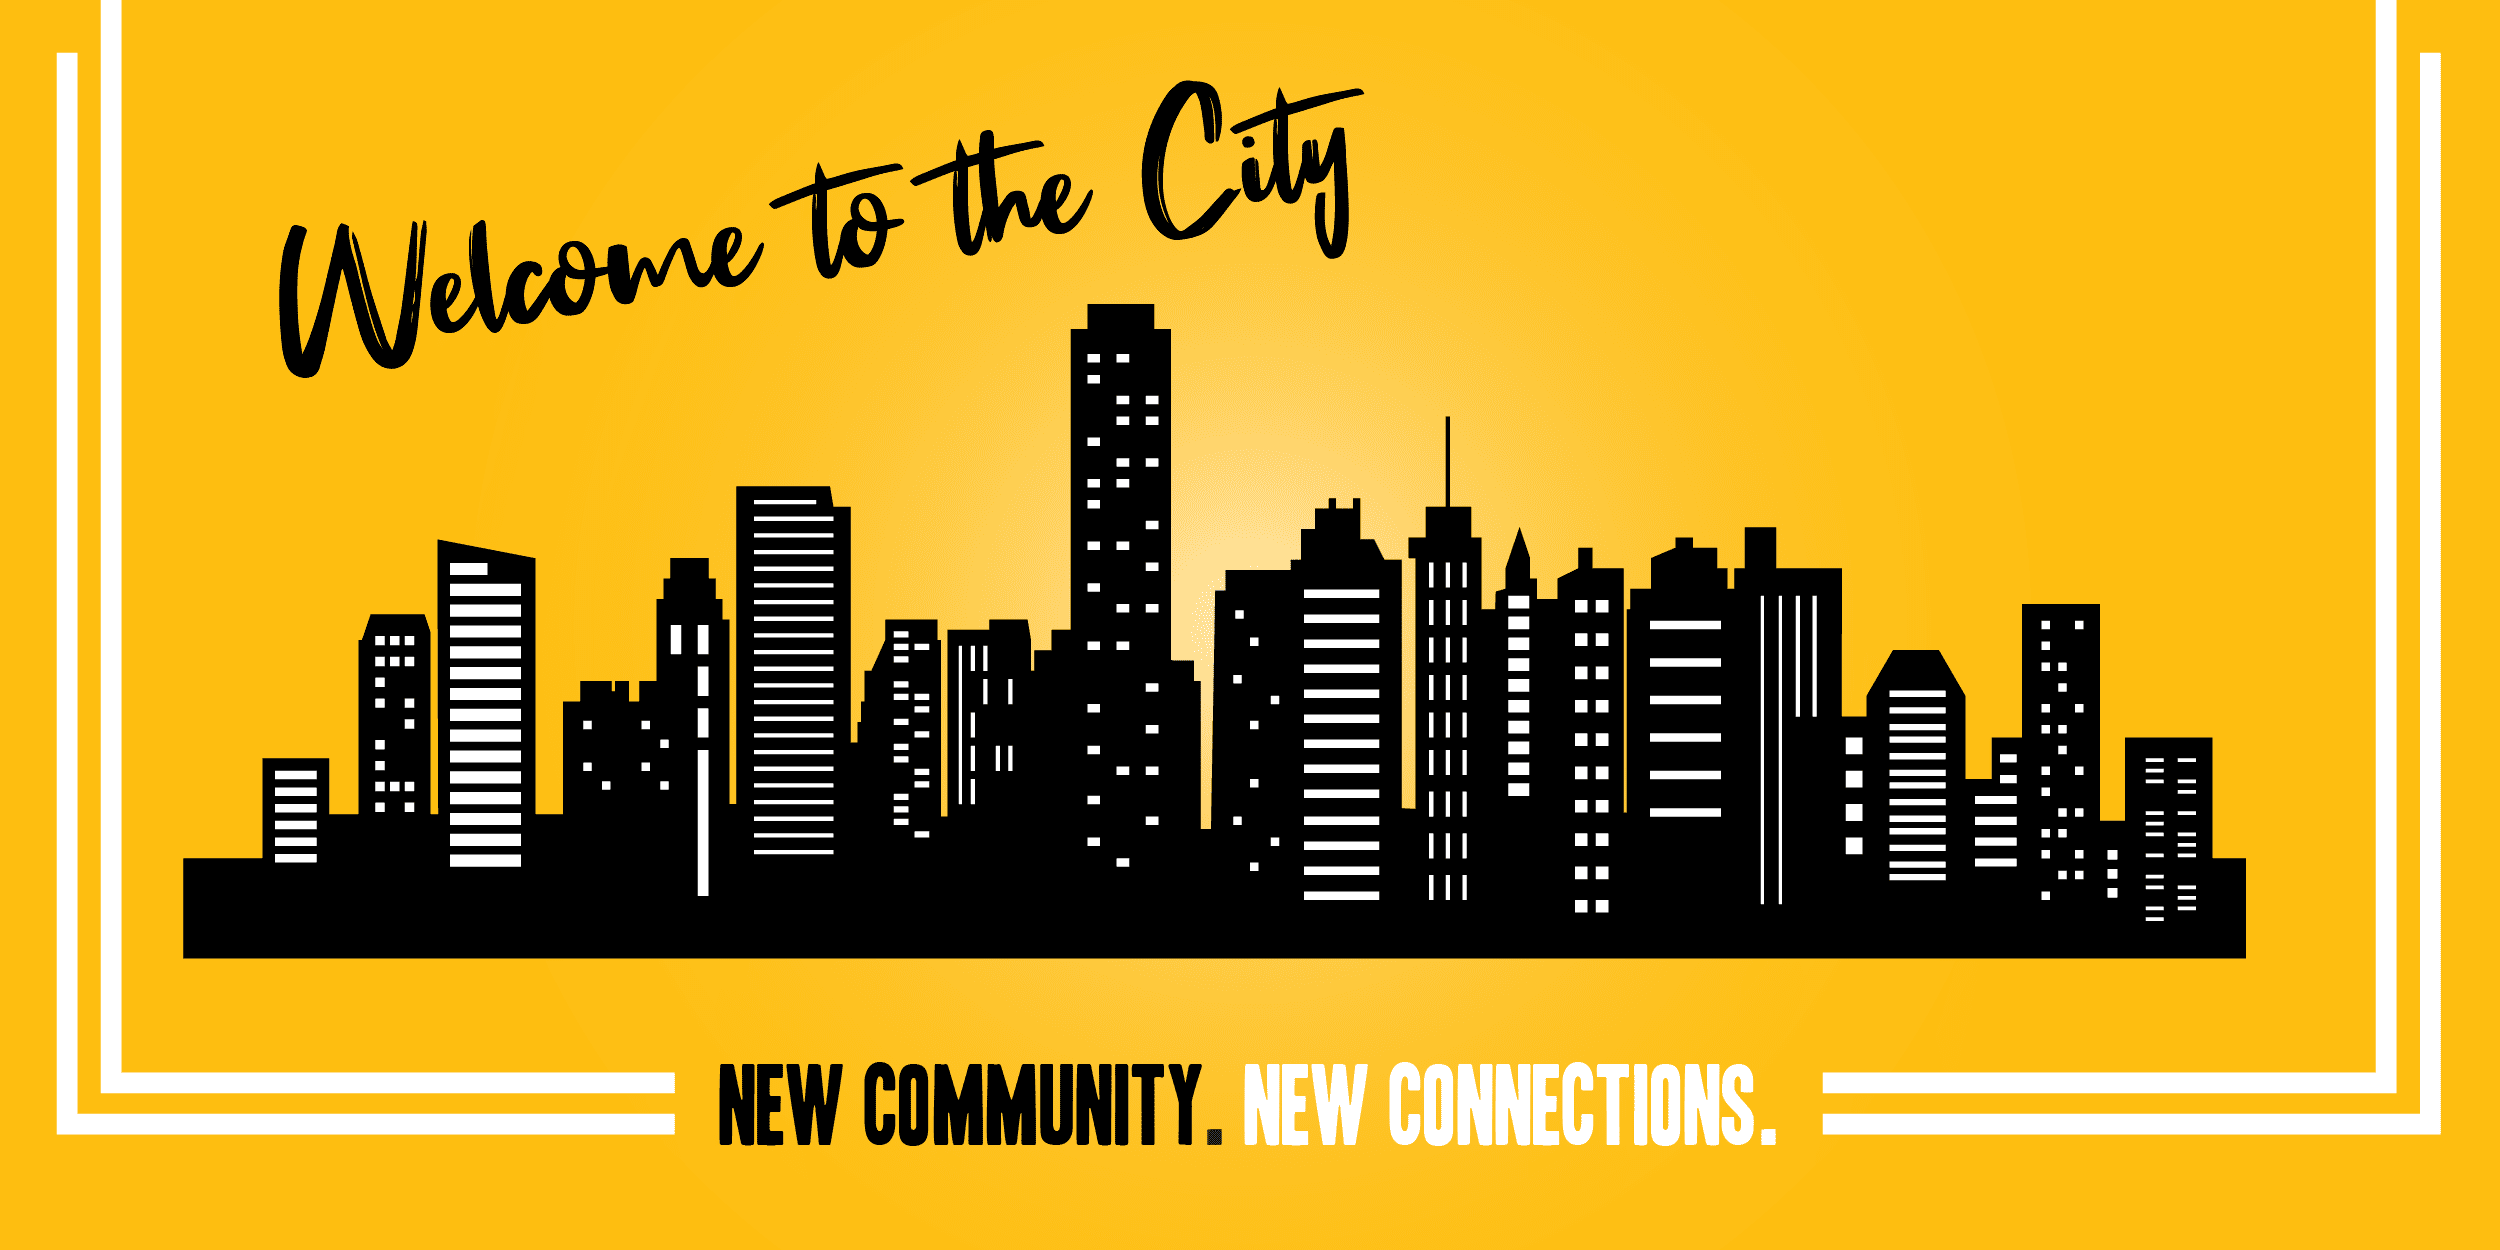 A graphic for Welcome to the City invites alumni to find new connections in their communities.